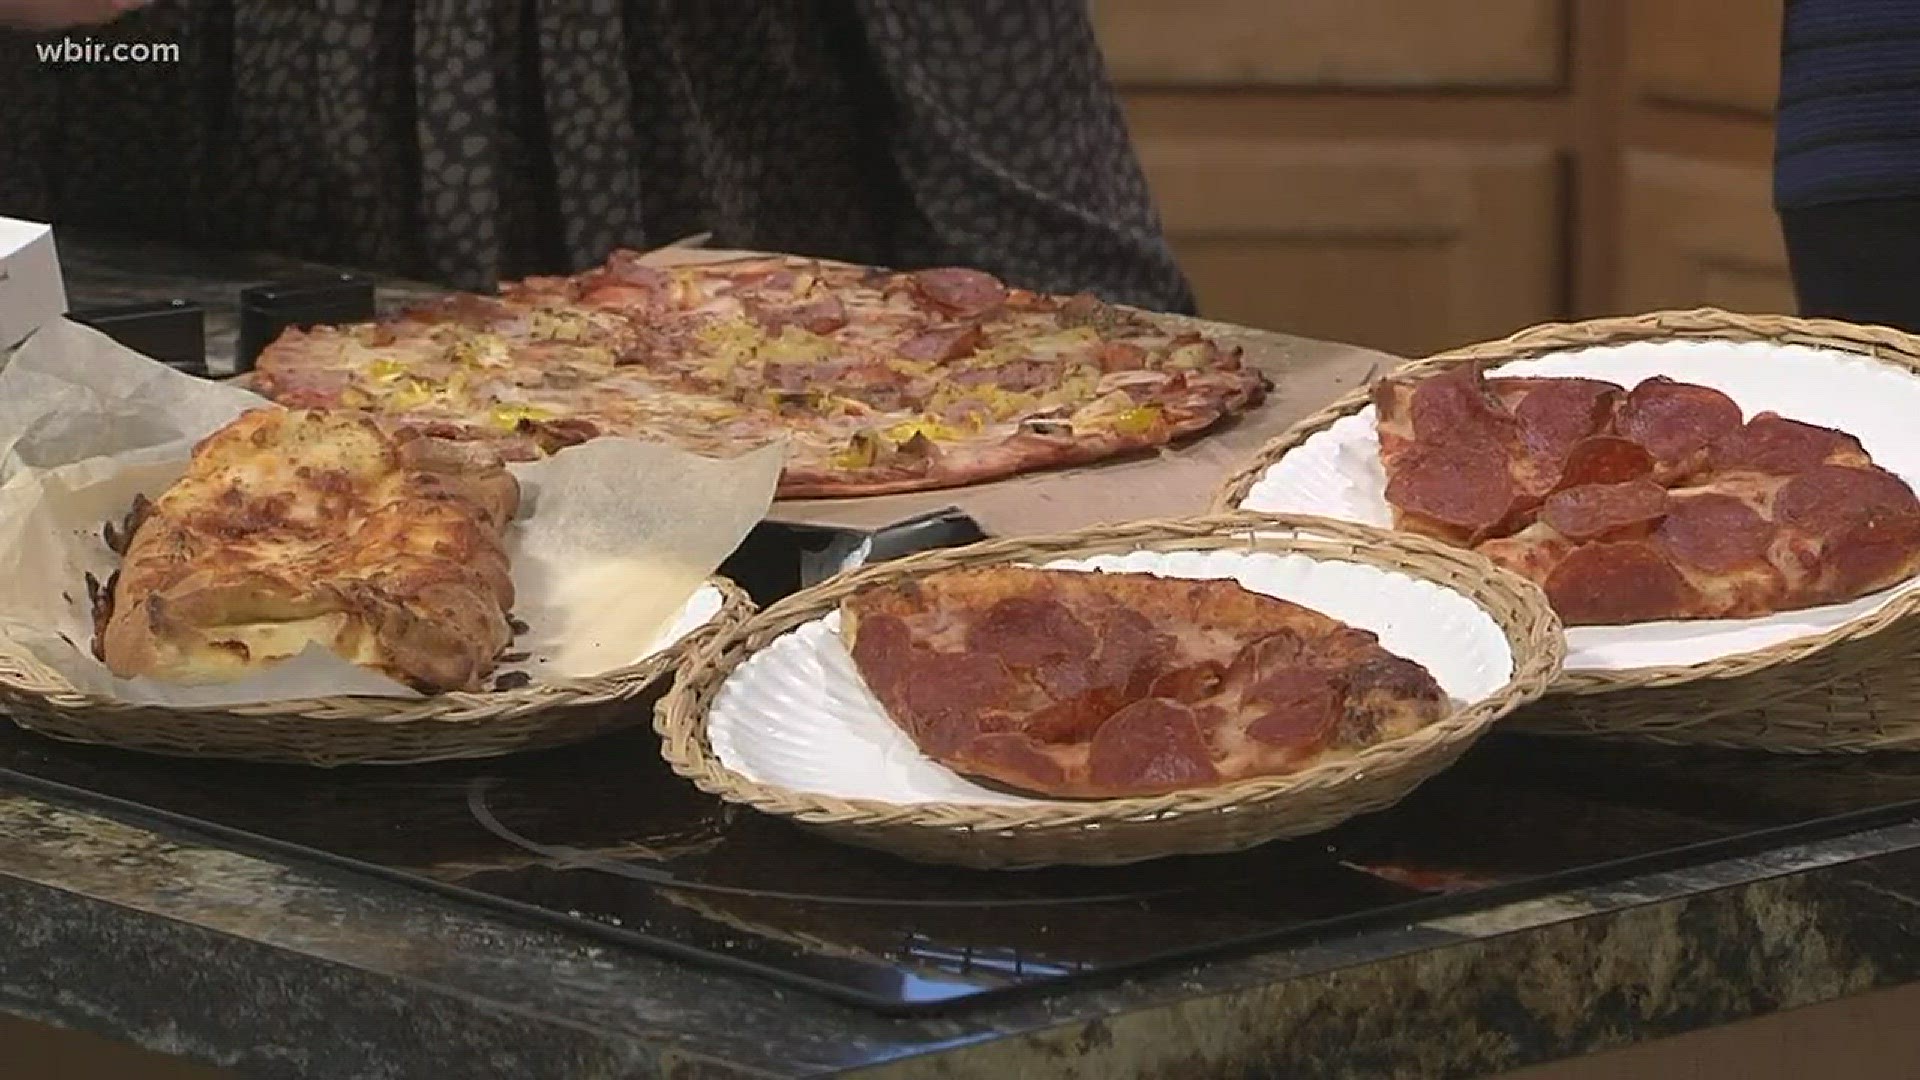 Love pizza but loathe the calories? Here are a few things to consider.